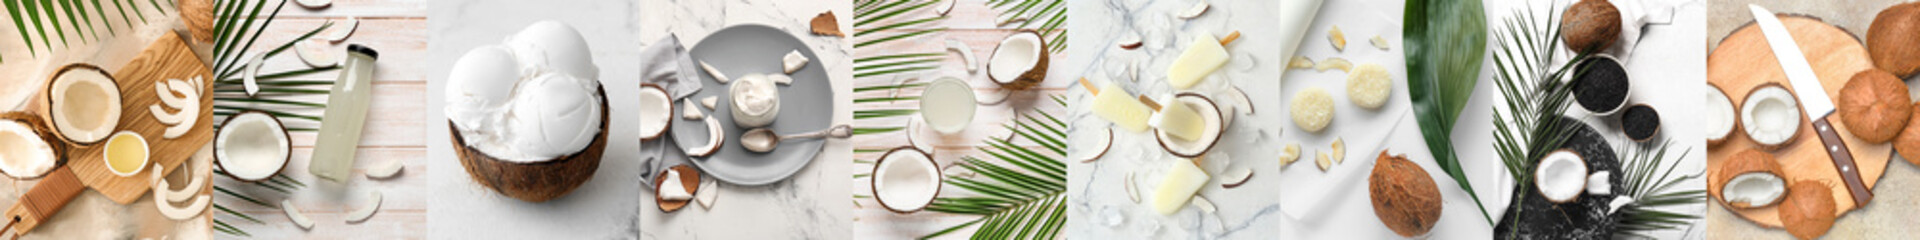 Set of different coconut products on light background